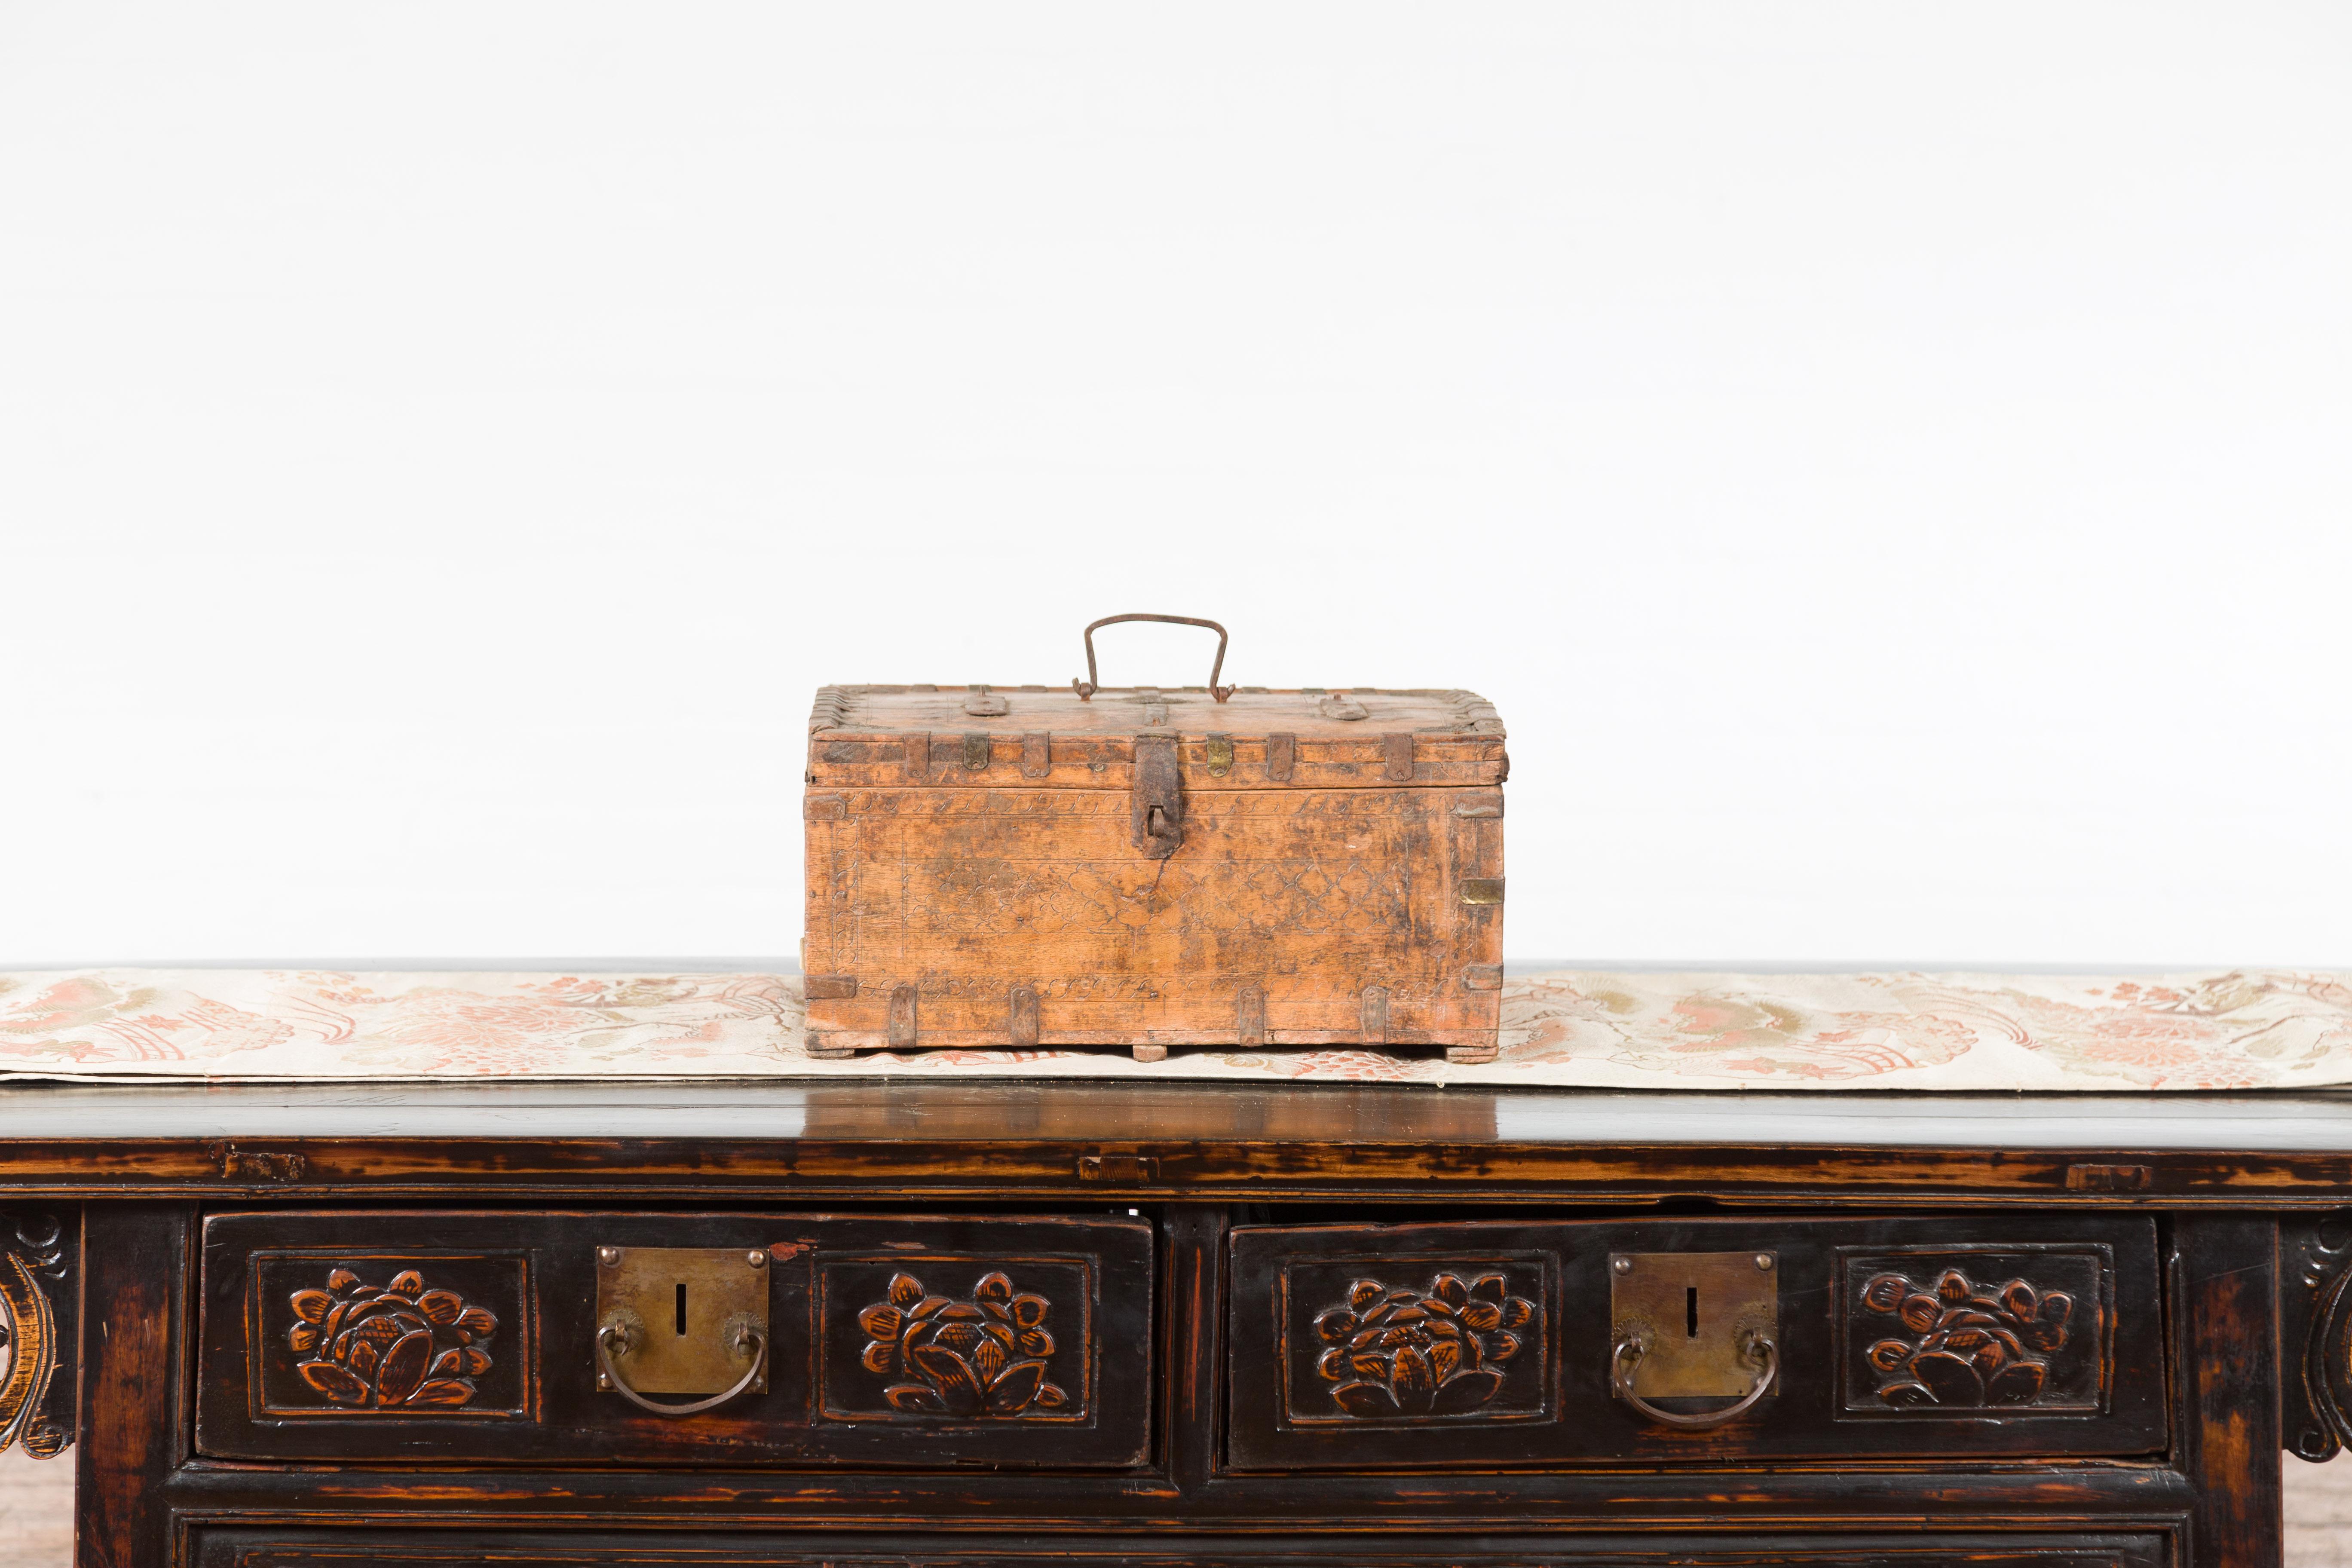 An Indian rustic wooden box from the 19th century, with nicely weathered appearance, iron details and carved motifs. Created in India during the 19th century, this wooden box features a rectangular lid half opening to reveal a partitioned interior.